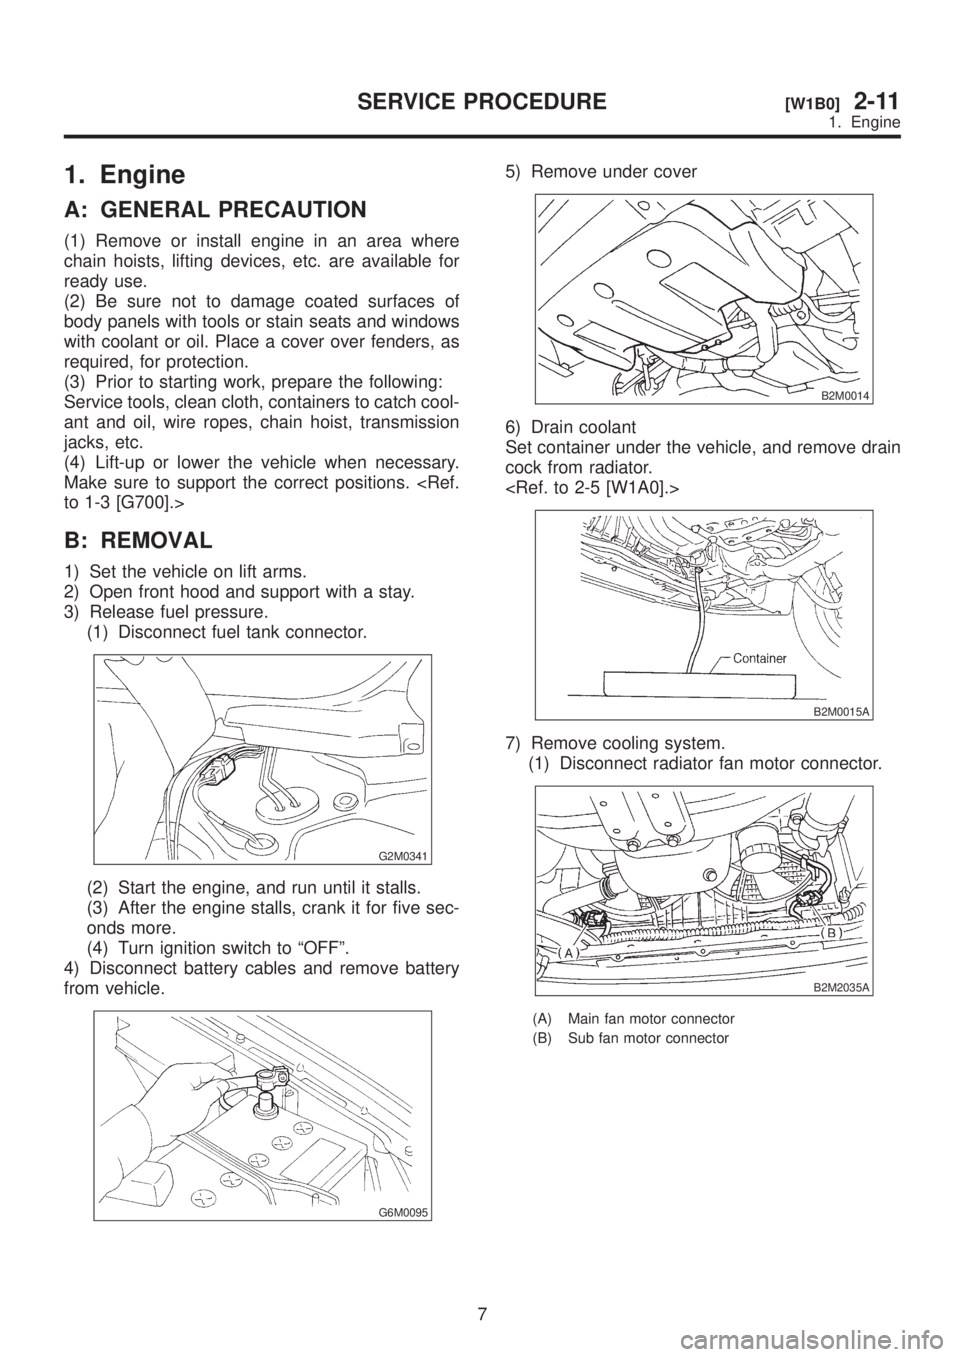 SUBARU LEGACY 1999  Service Repair Manual 1. Engine
A: GENERAL PRECAUTION
(1) Remove or install engine in an area where
chain hoists, lifting devices, etc. are available for
ready use.
(2) Be sure not to damage coated surfaces of
body panels 